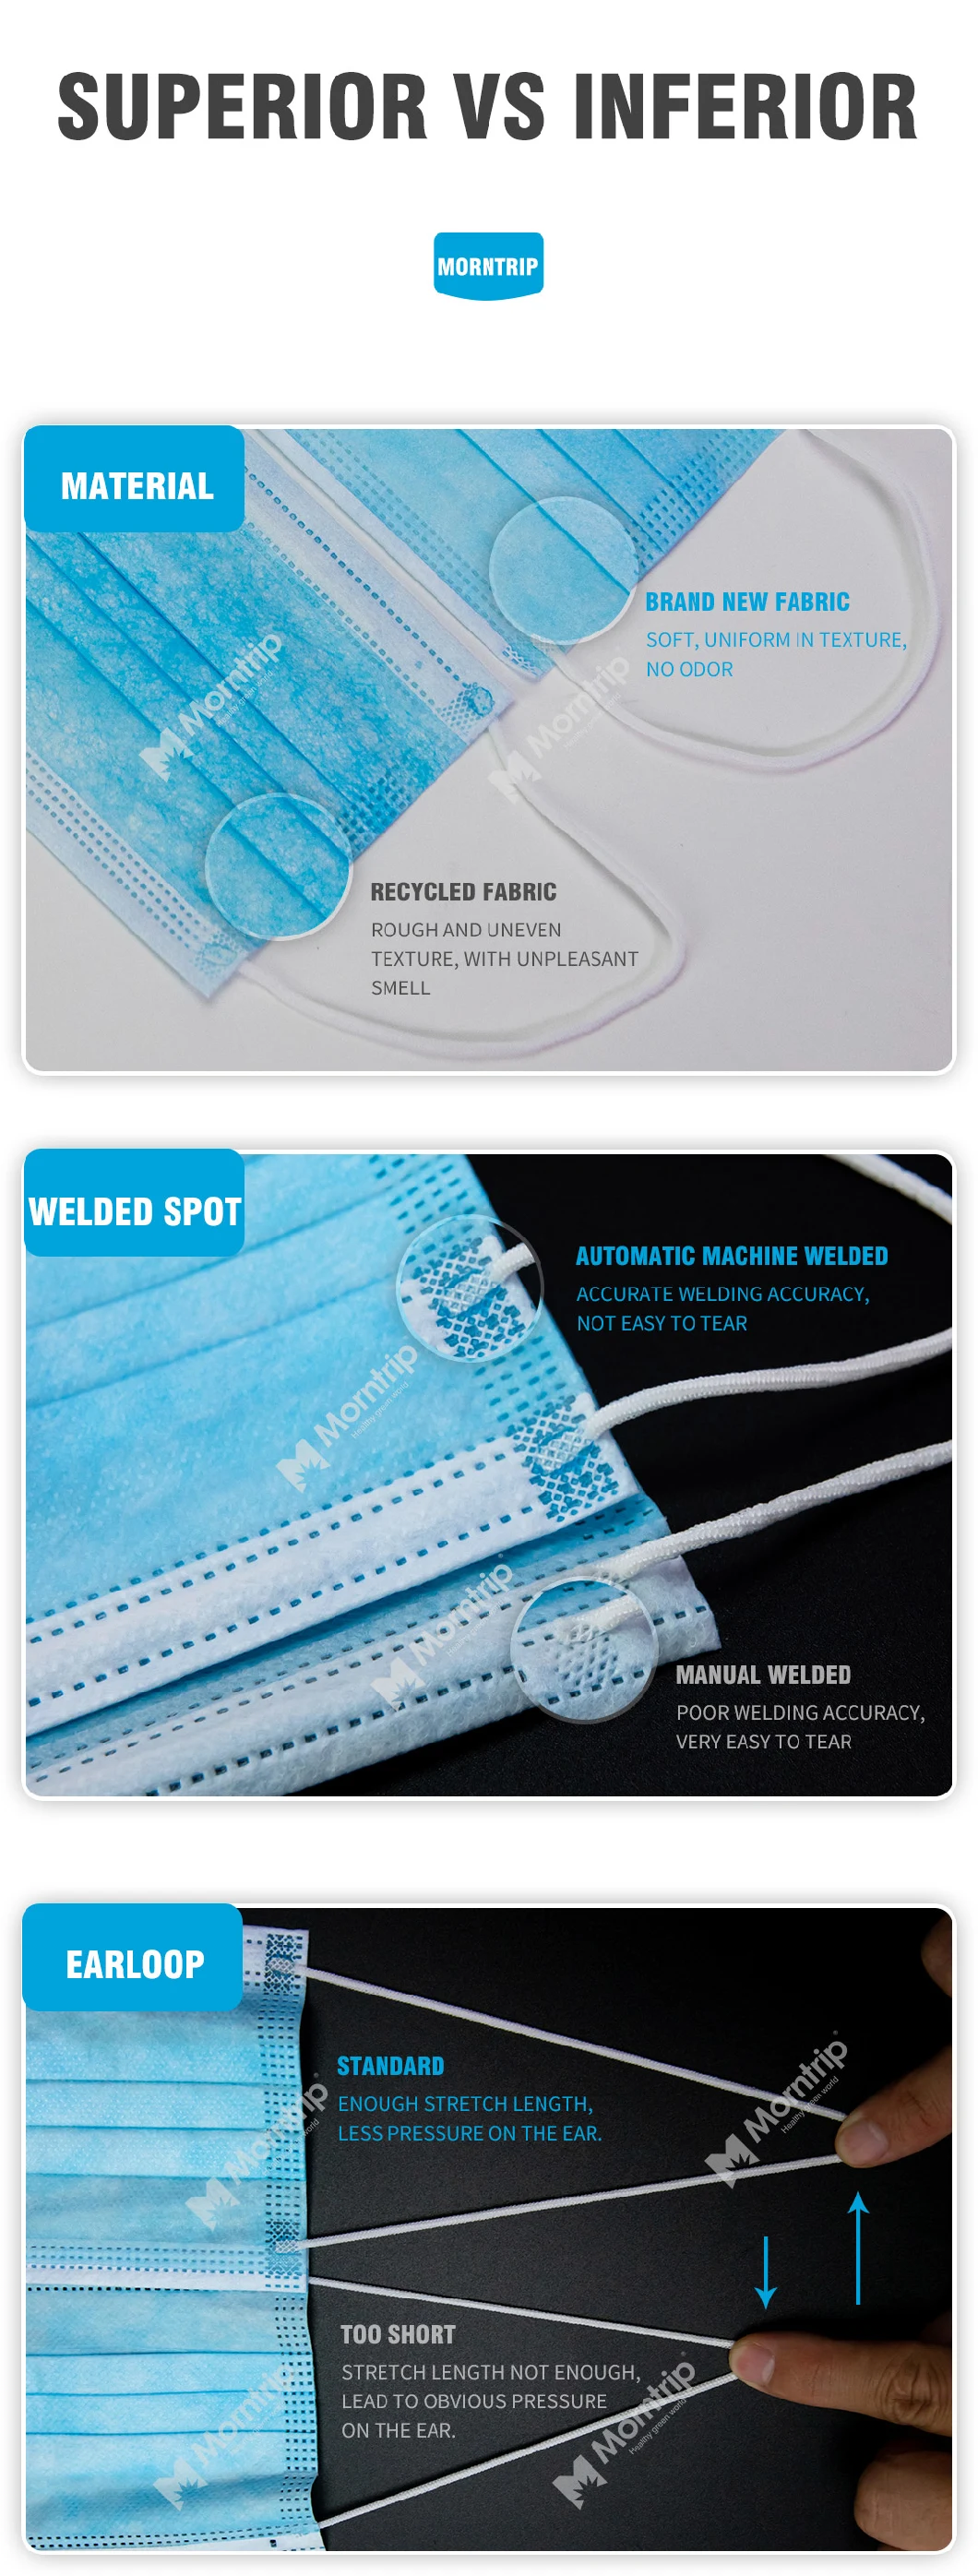 Colored Nonwoven Bfe 99 Sterile Antiviral 3 Ply Disposable Earloop Sanitary Medical Surgical Face Mask